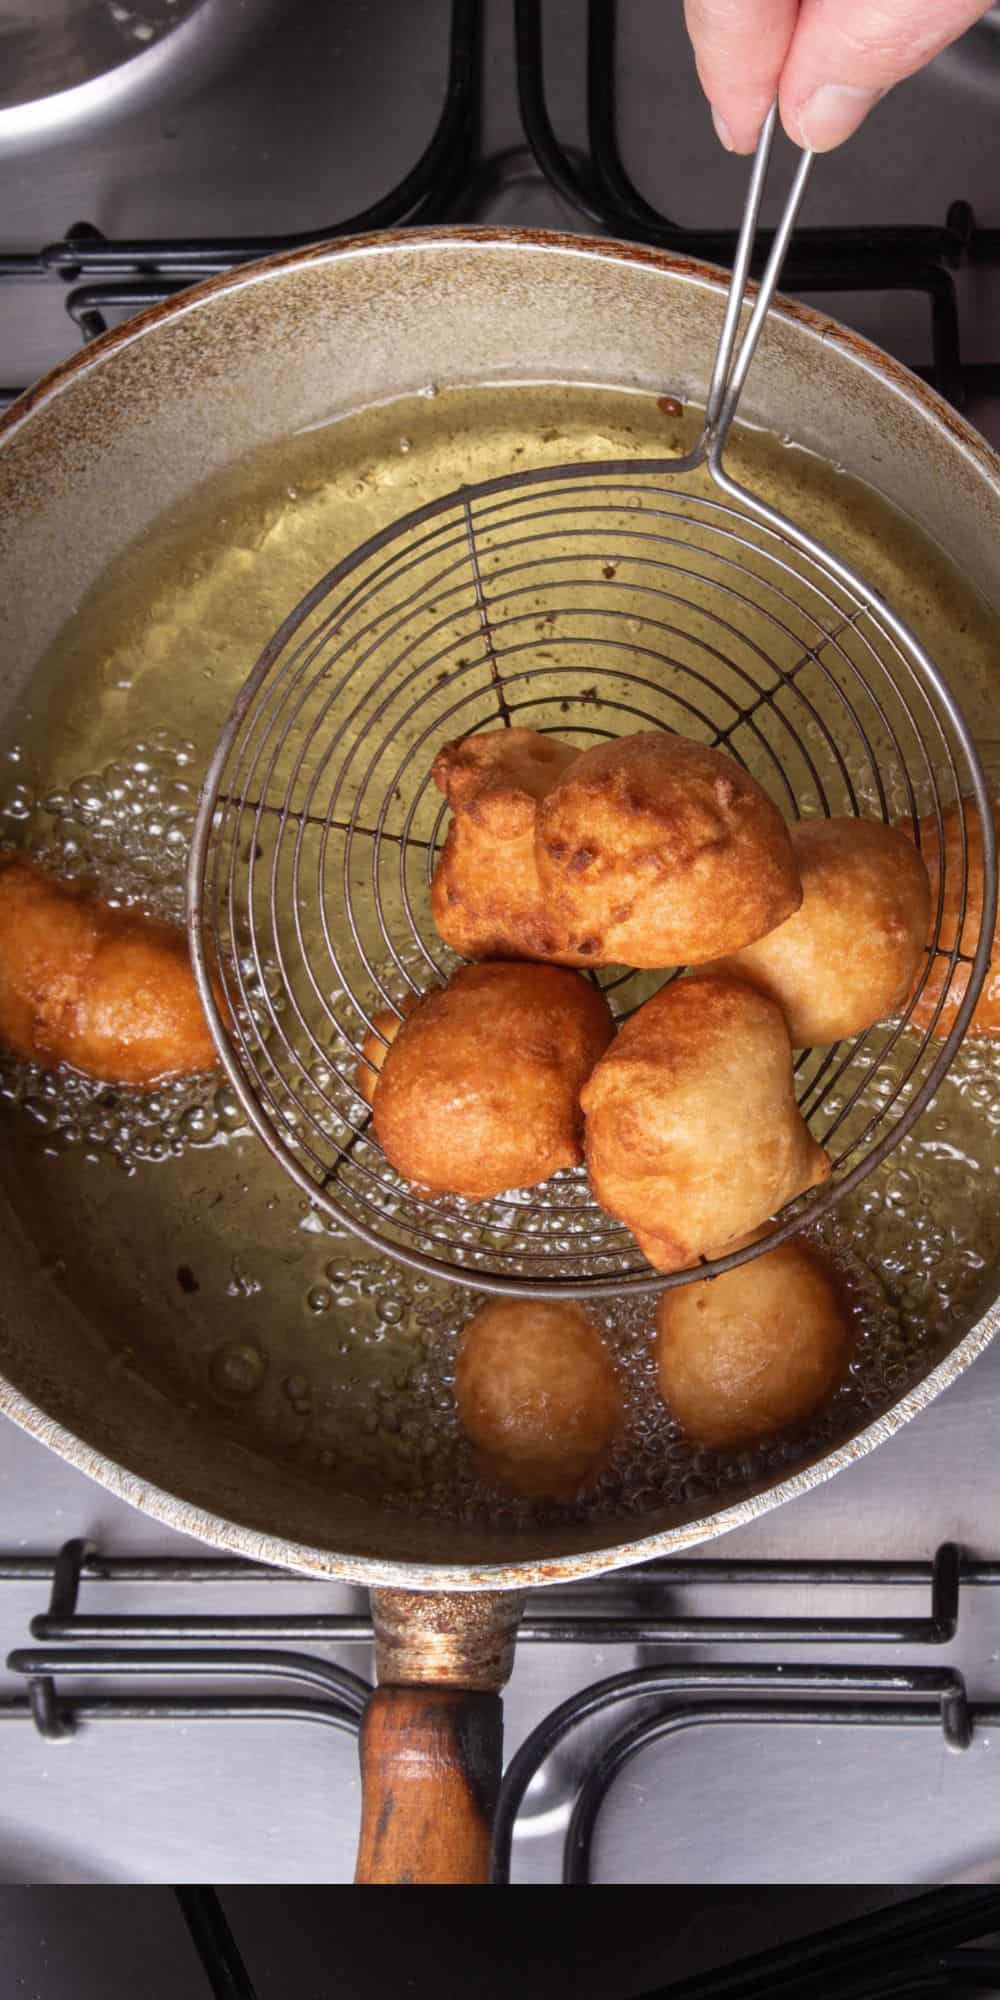 Removing donut holes from hot oil.